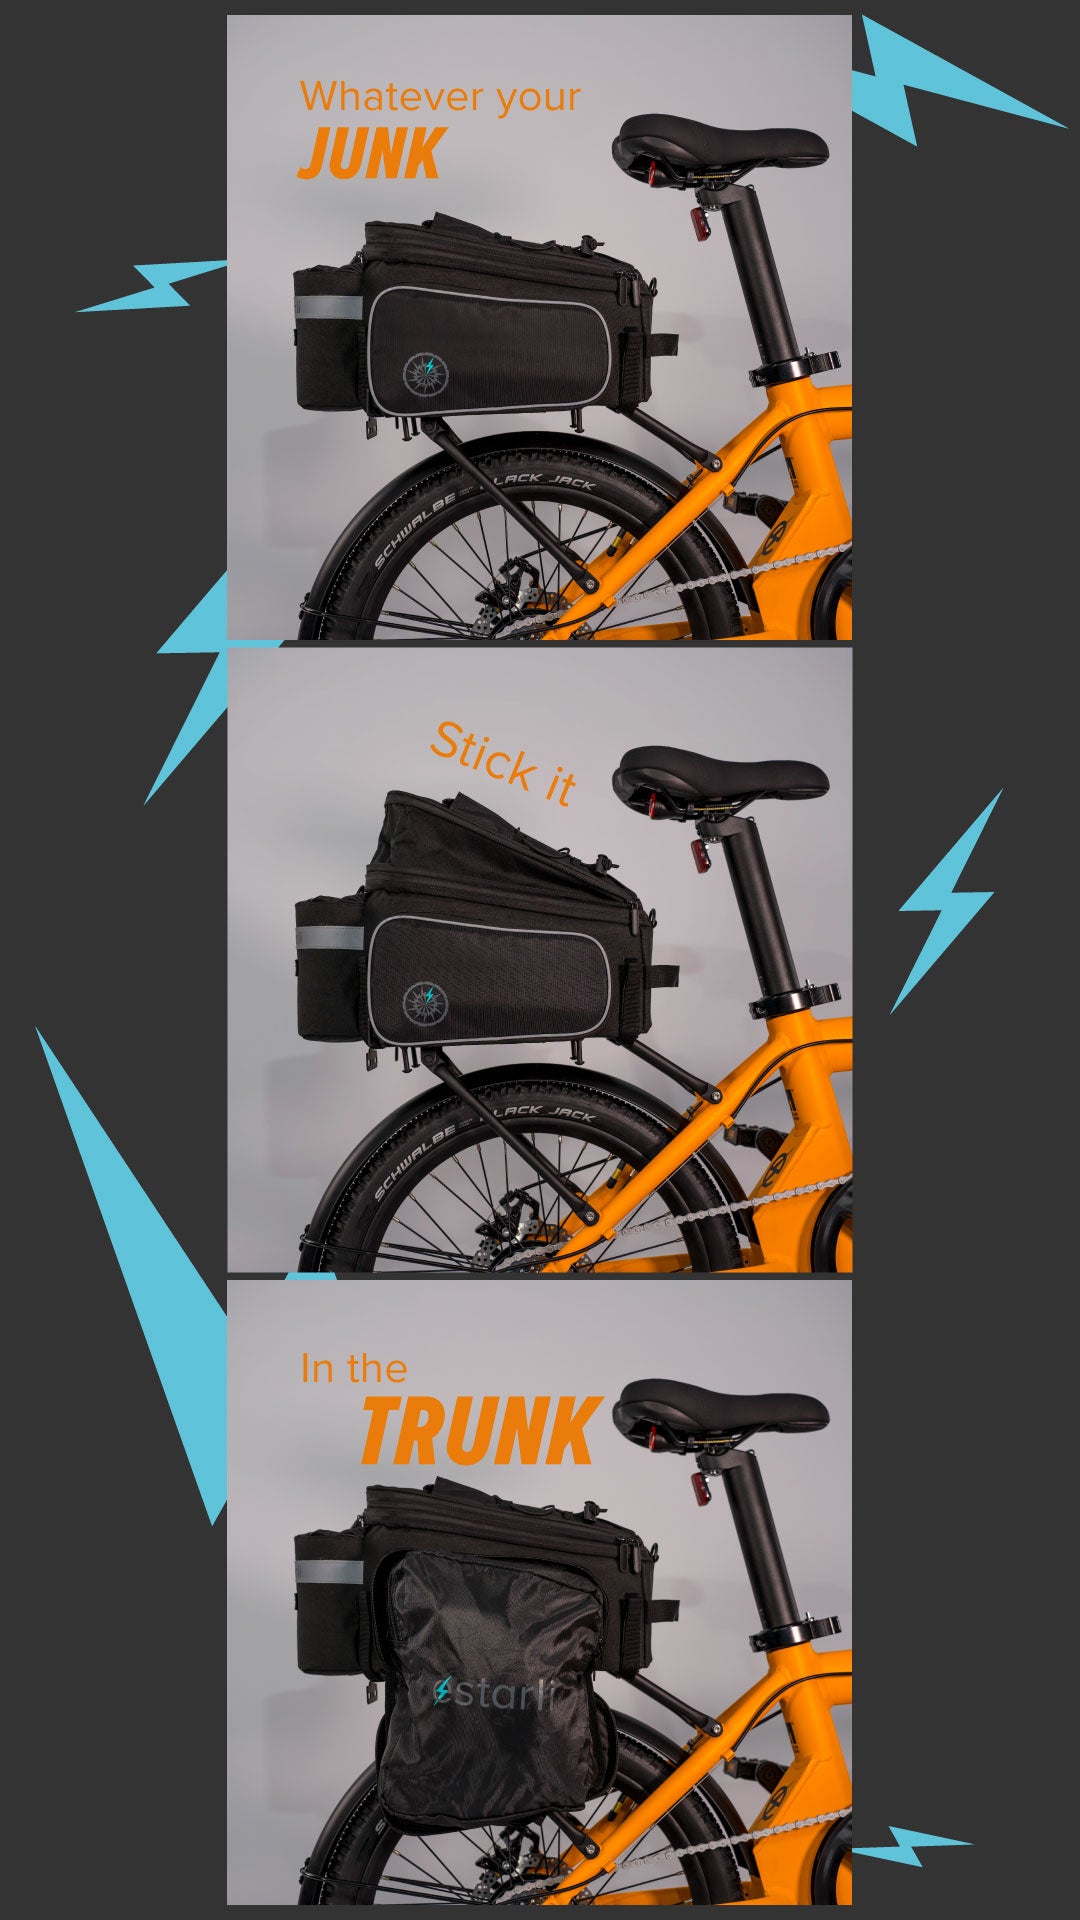 The estarli trunk and pannier bag is the ideal eBike accessory. Waterproof, thermal and featuring a carrying should & hand strap